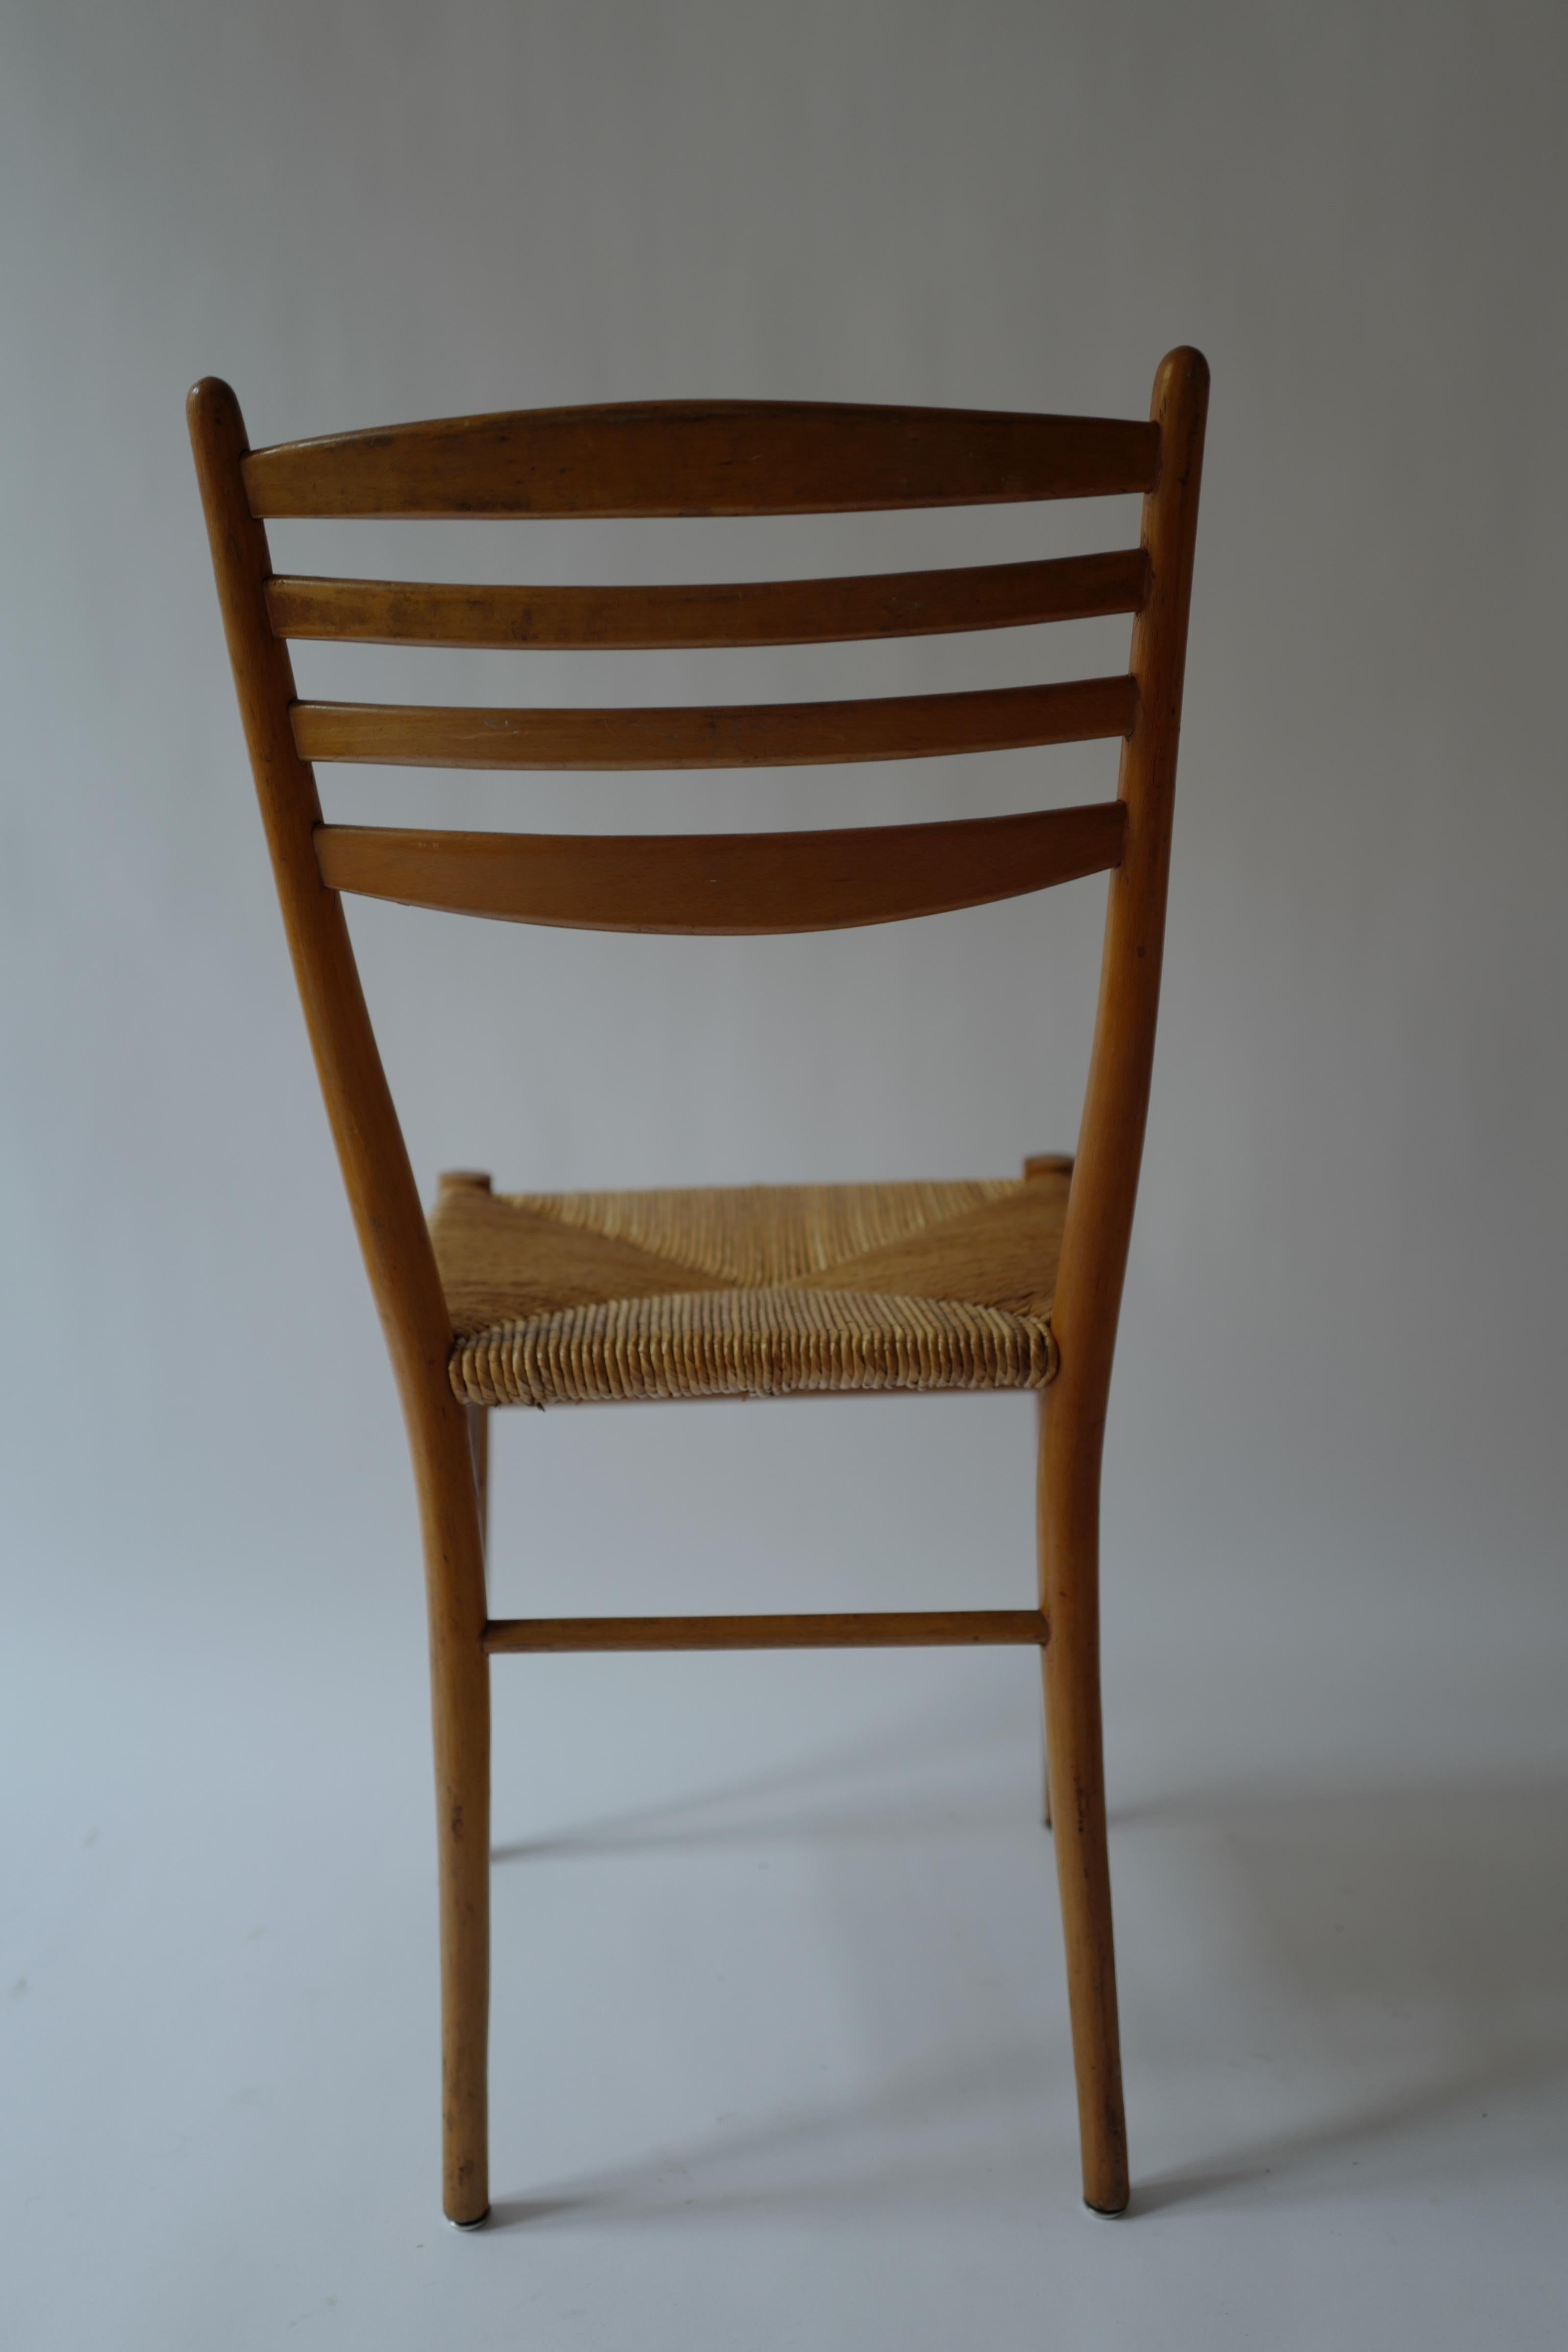 Woven Wicker and Wood Gio Ponti Style Chair 1950's In Good Condition For Sale In Milano, IT